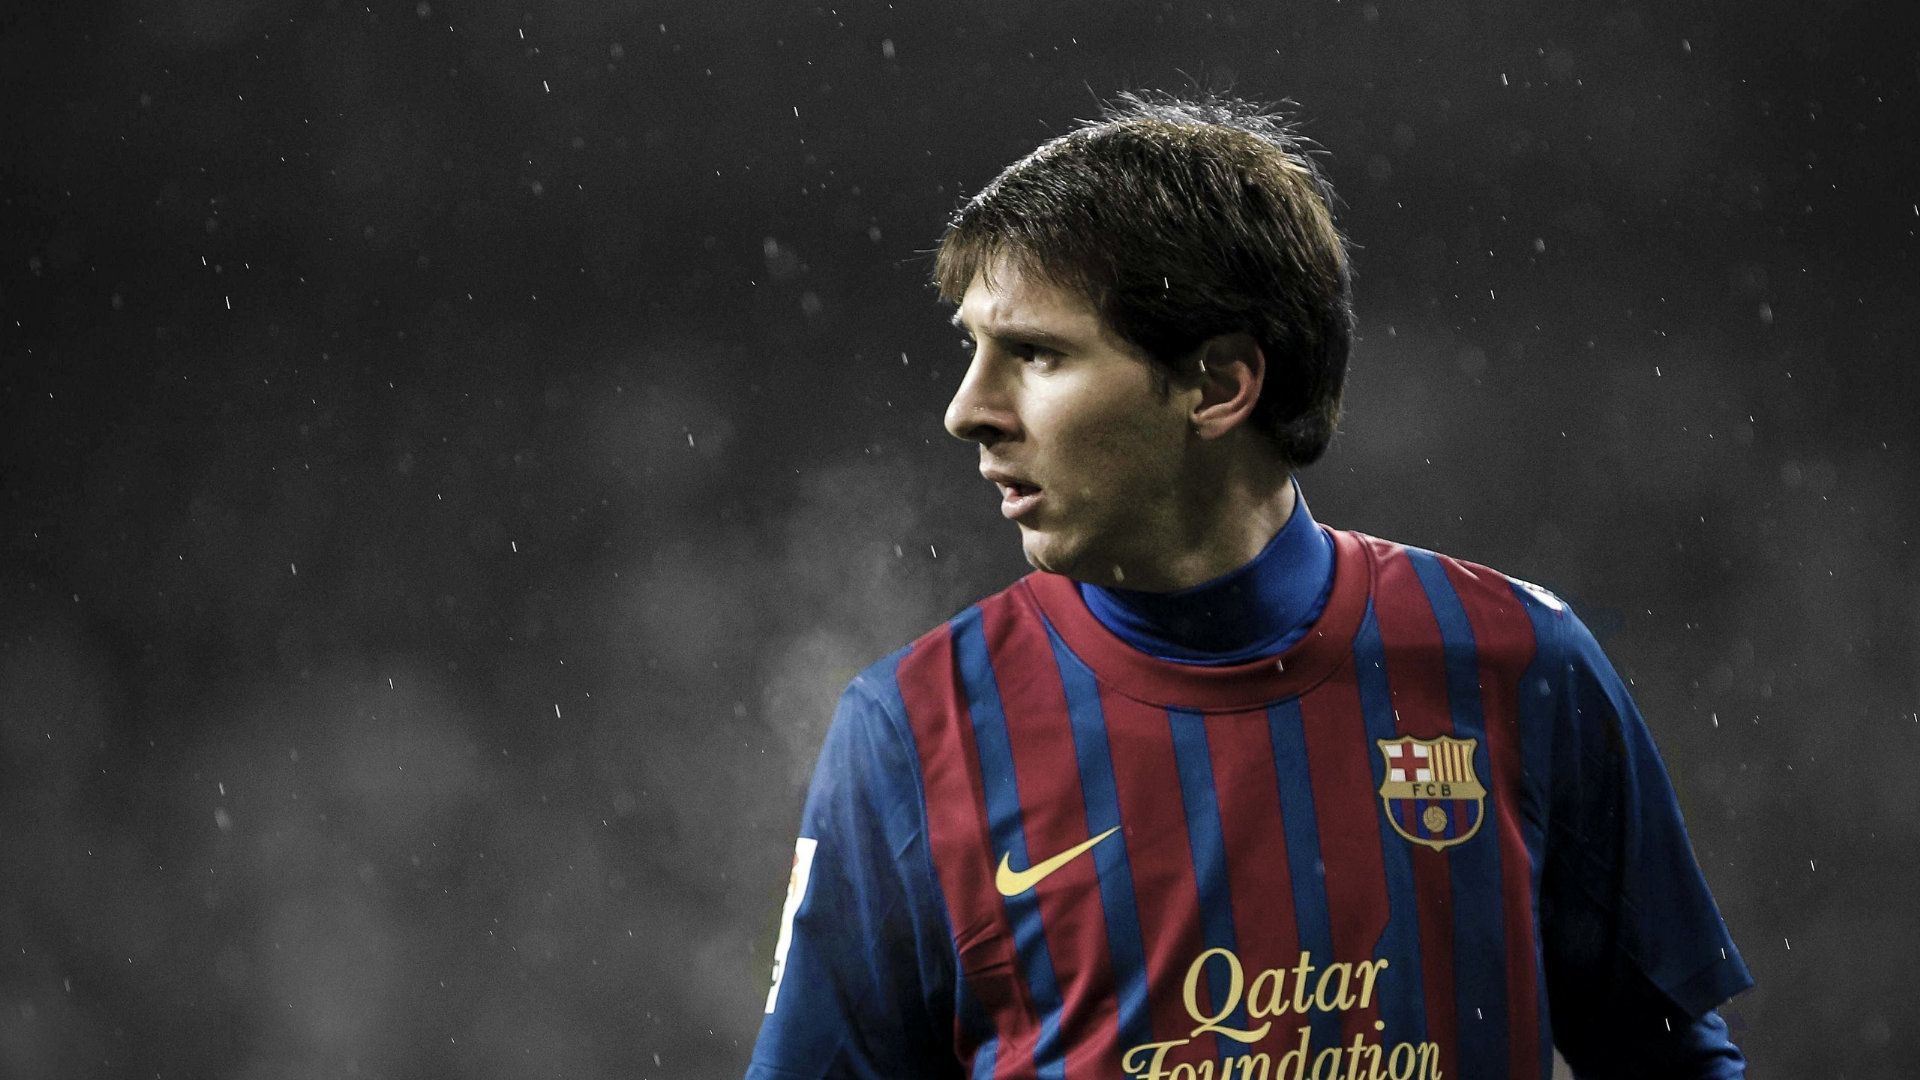 Messi Wallpapers | Messi News